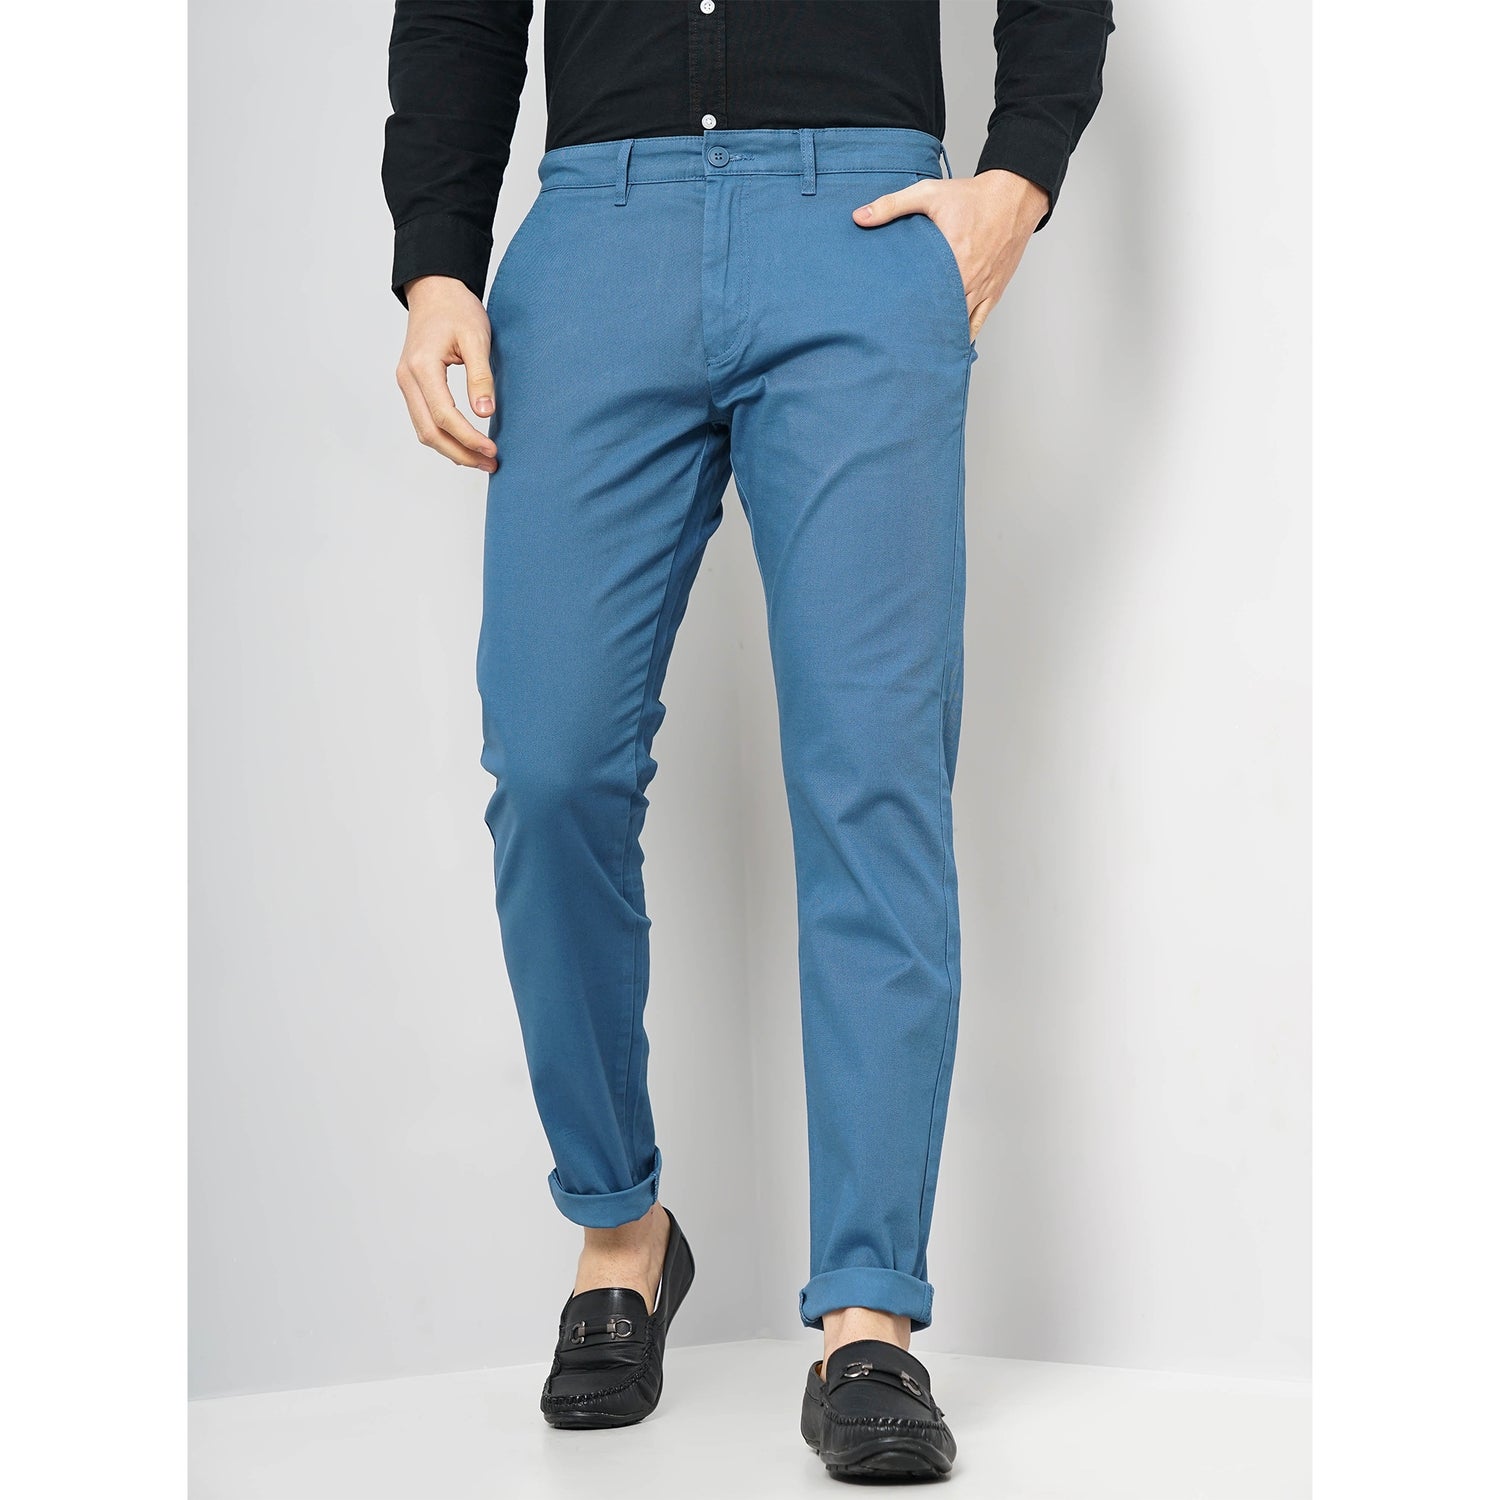 Men Blue Solid Slim Fit Cotton Basic Chinos Casual Trousers (TOCHARLES1)